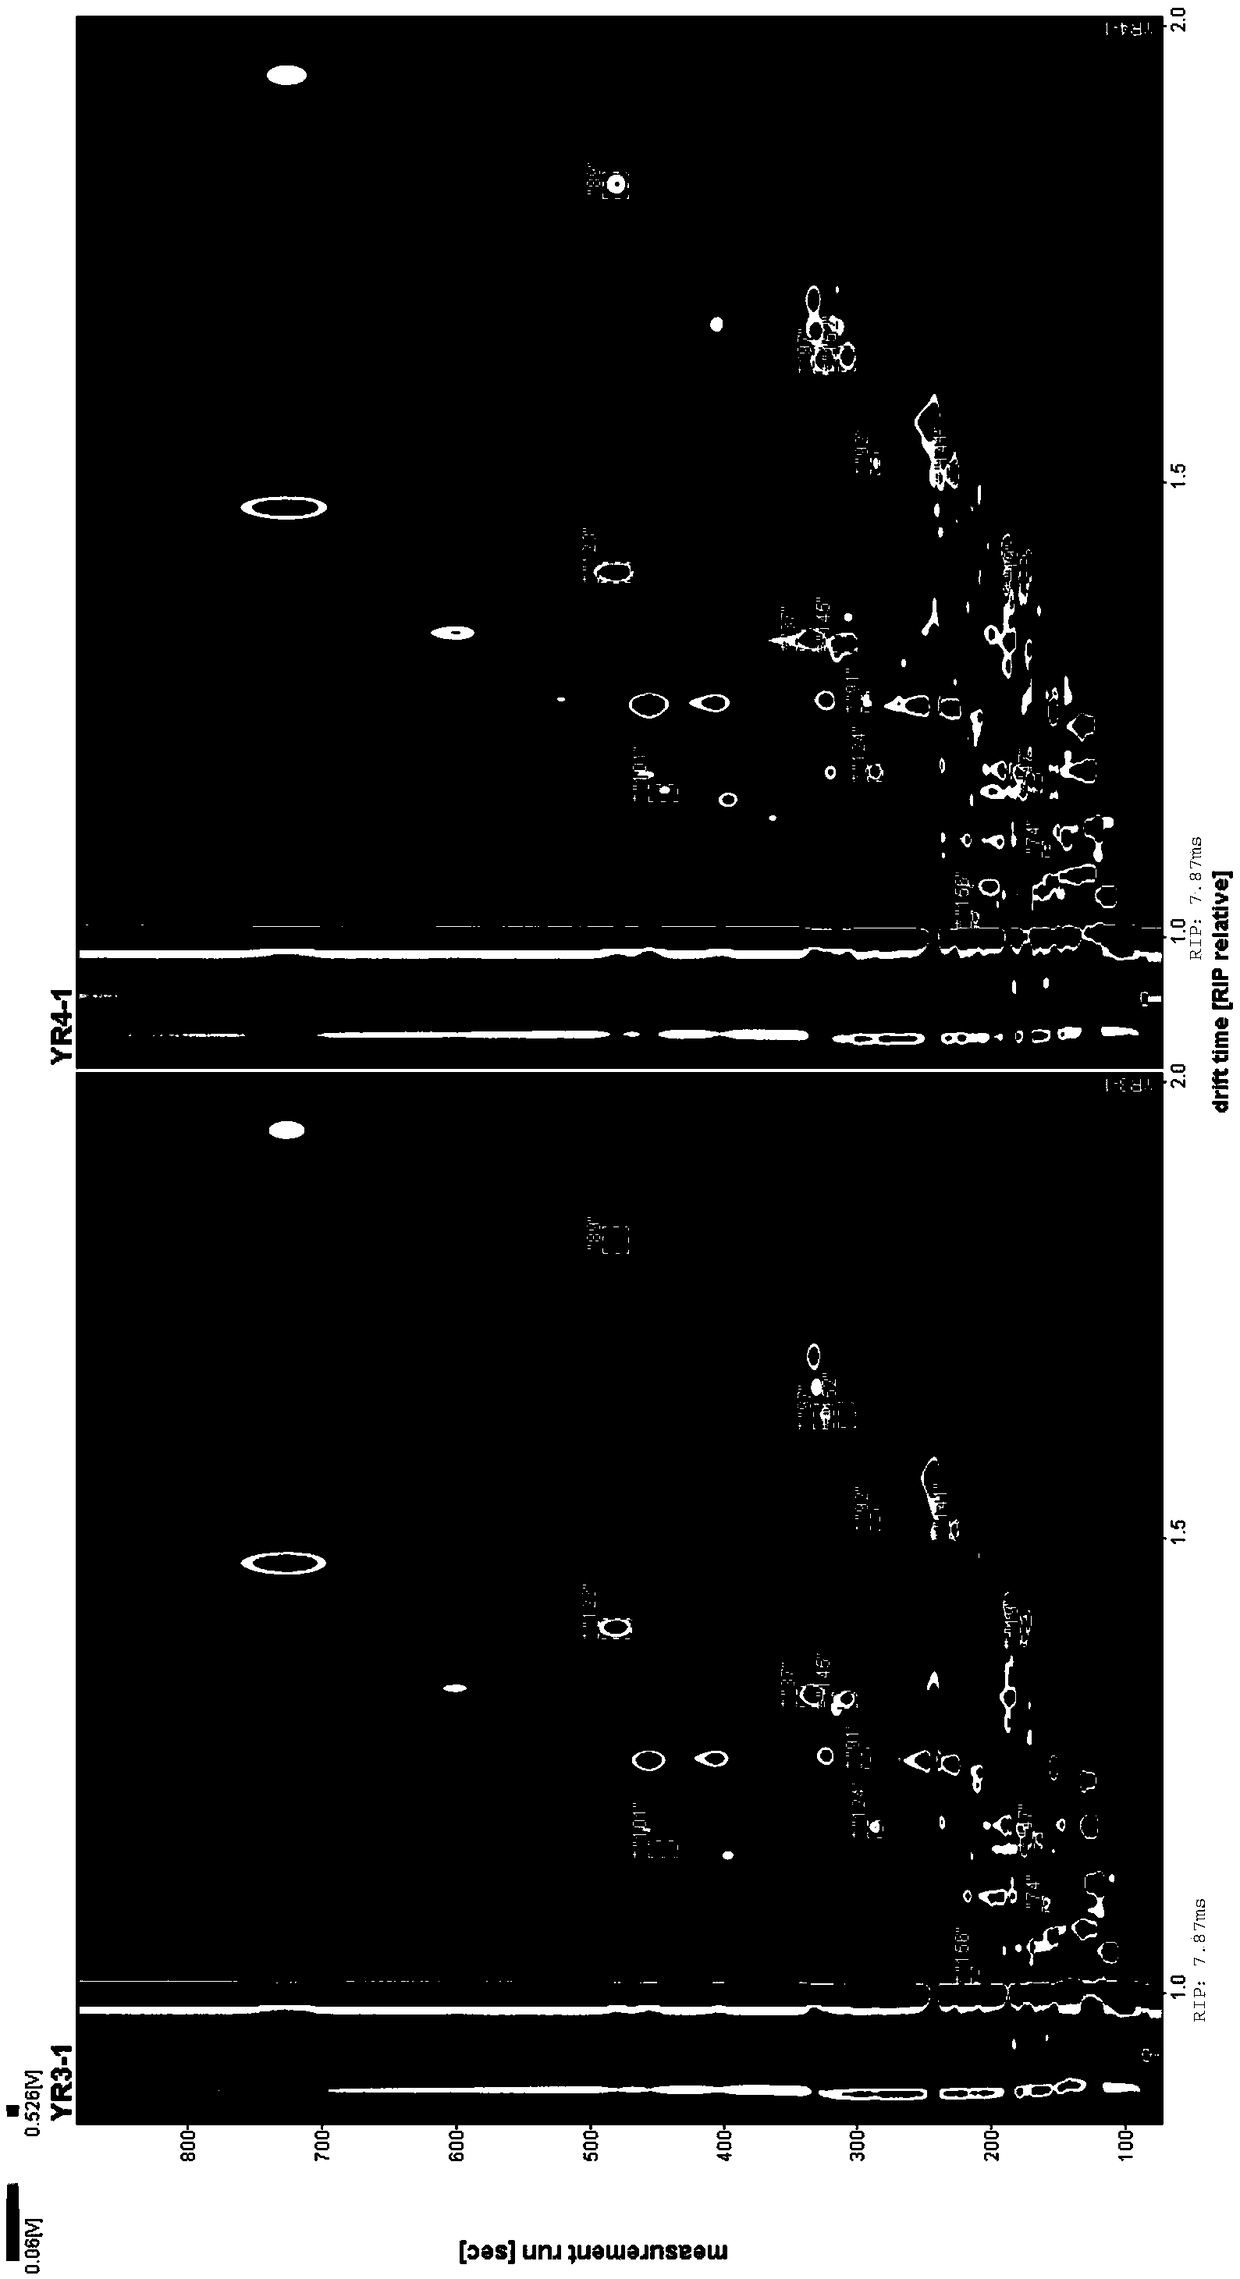 Method for efficiently identifying differential small molecular substances in yellowed and normal unhusked rice